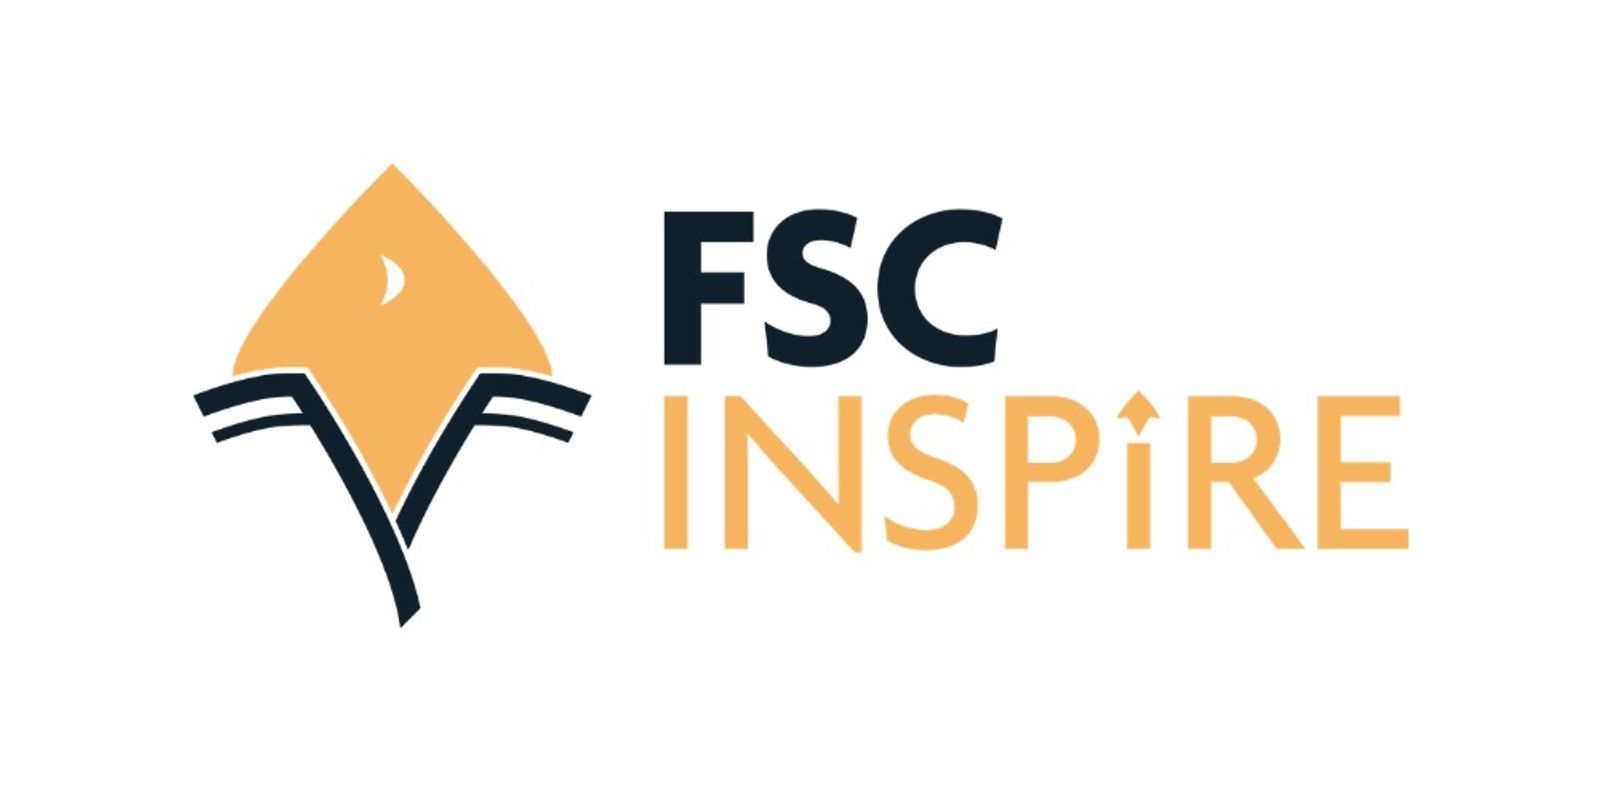 FSC INSPIRE, Chaturbate to Host Sex Worker Dating Panel